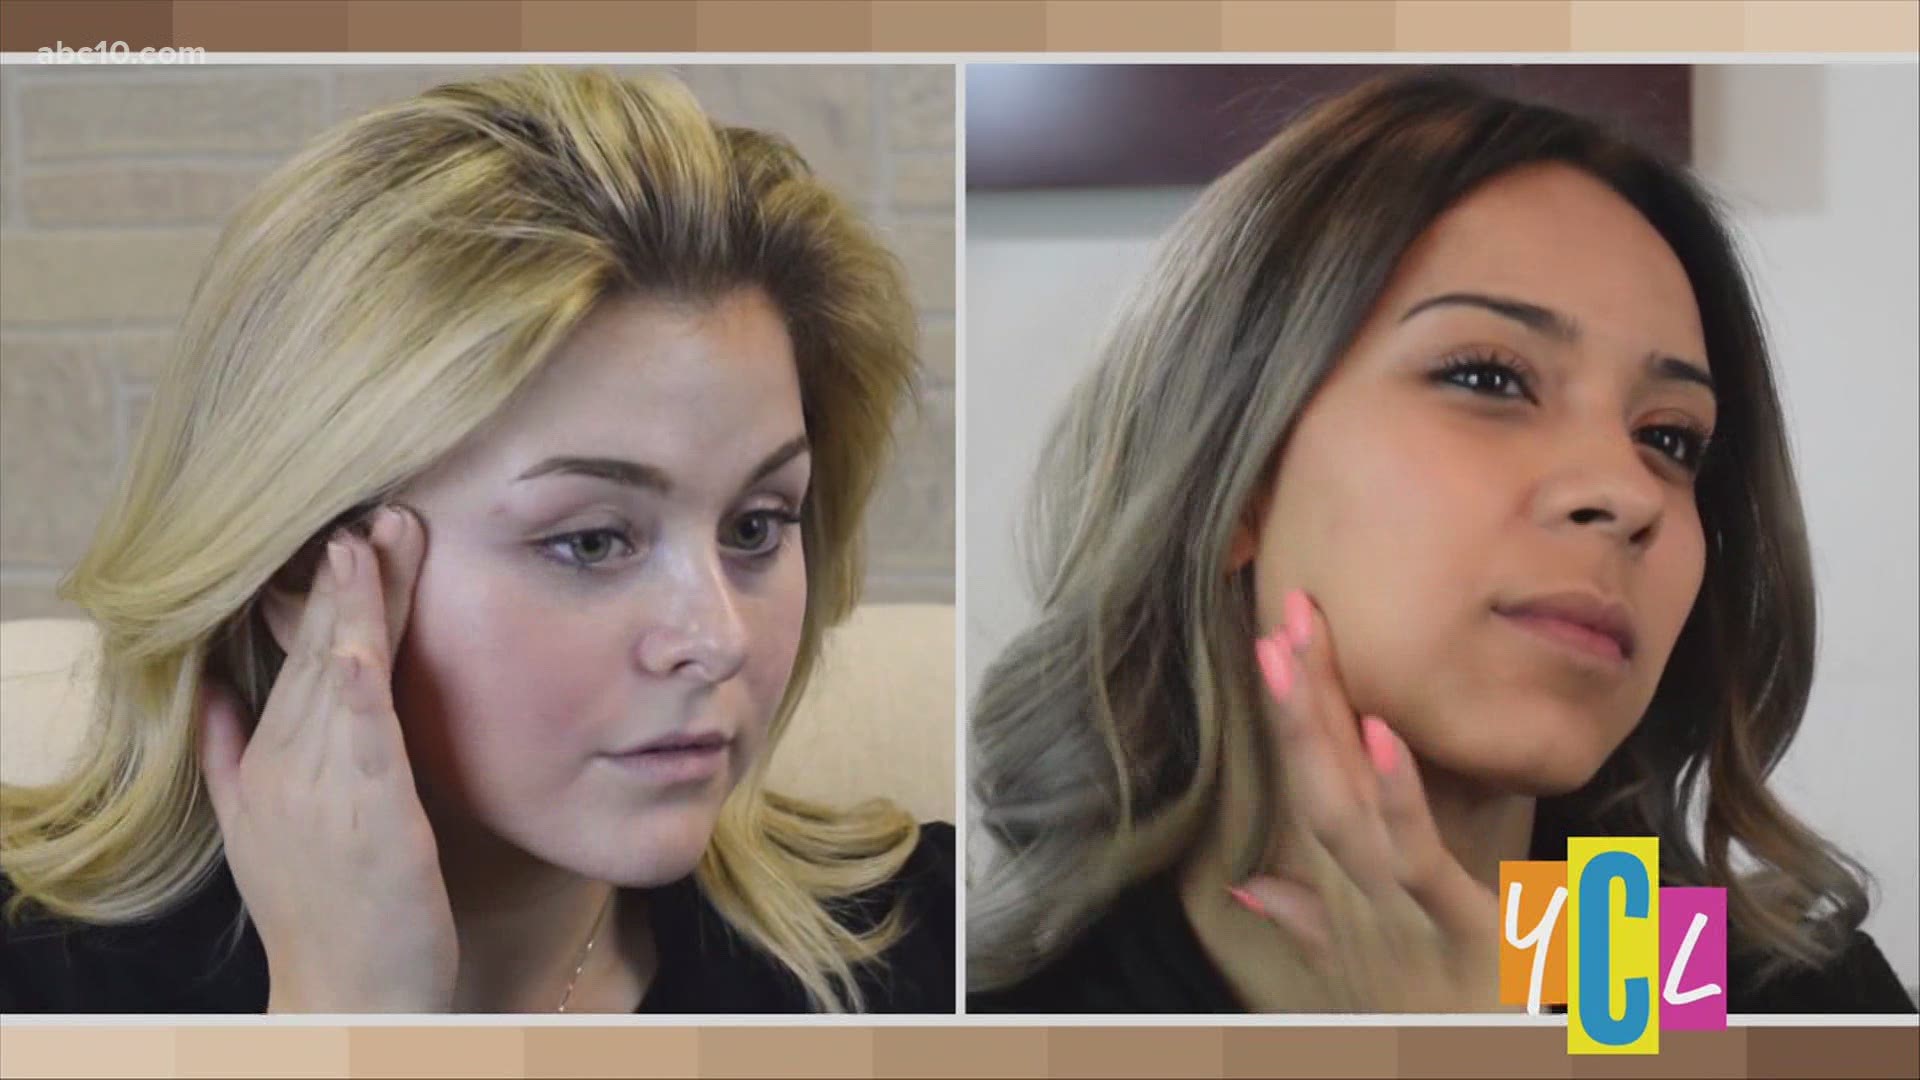 Culler Beauty’s self-adjusting foundation claims to take the guess work out of your makeup routine. This segment paid for by True Earth Health Solutions.